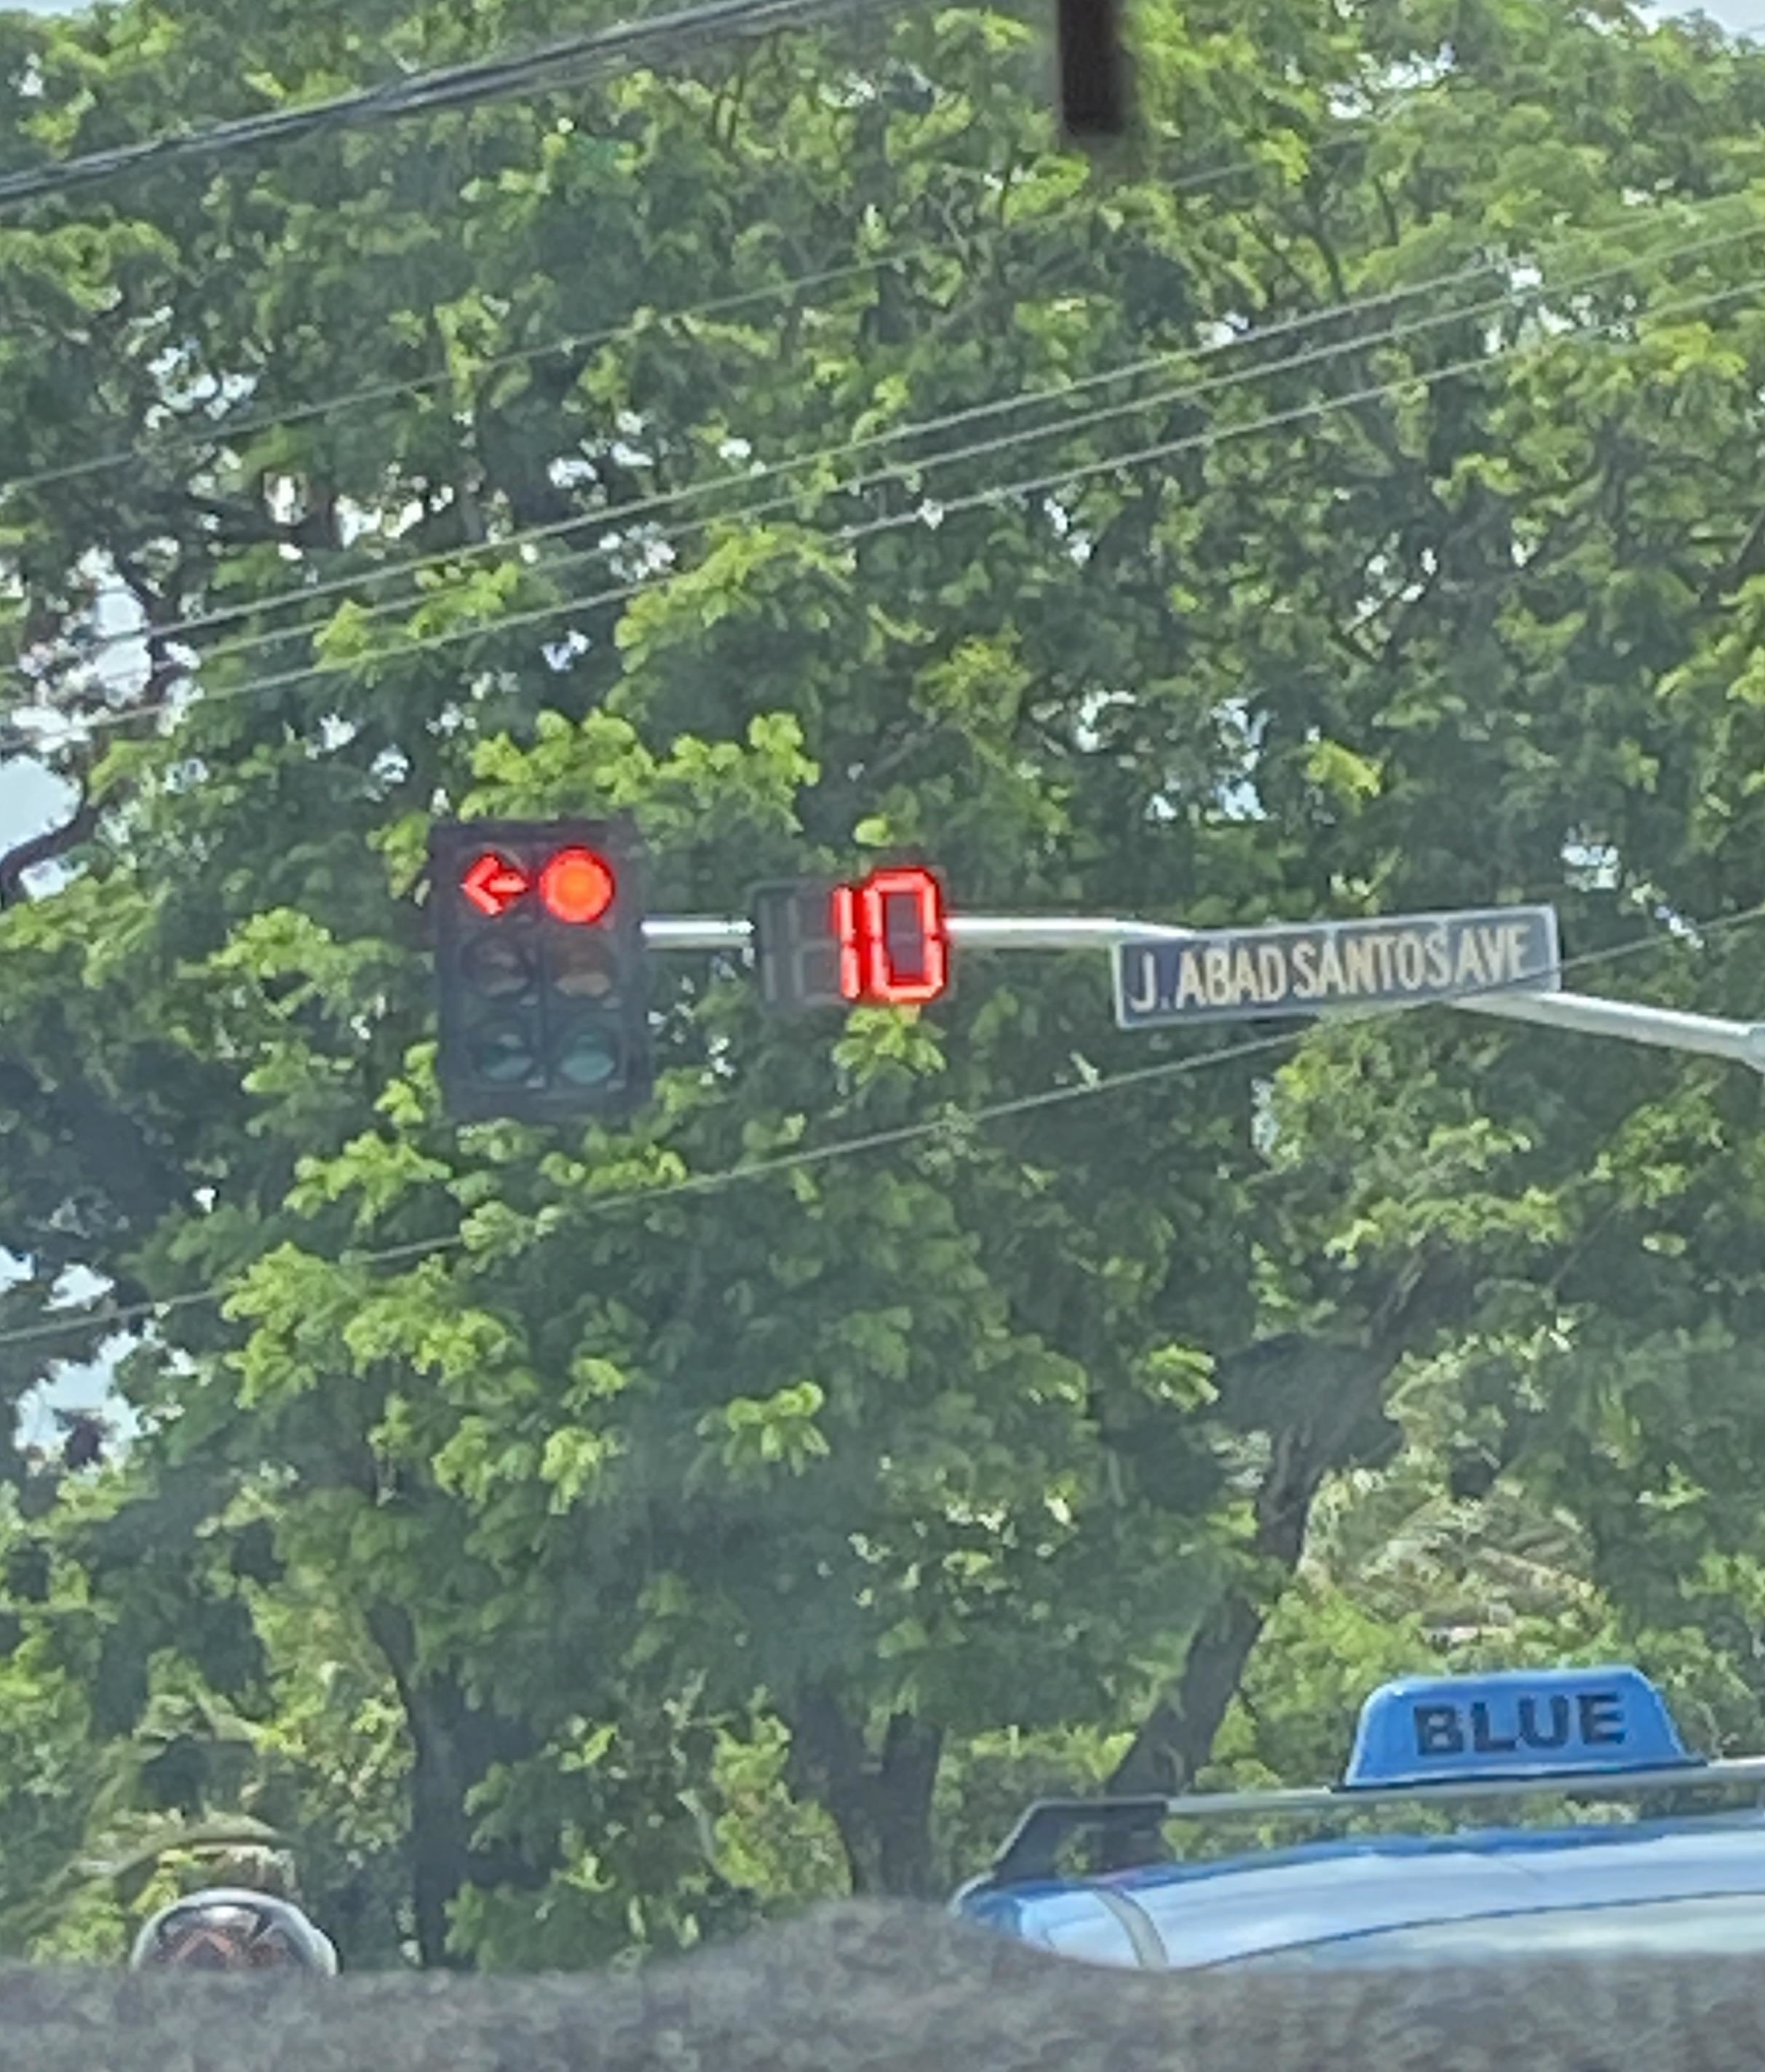 Red traffic light with a timer showing 10 seconds, framed by greenery